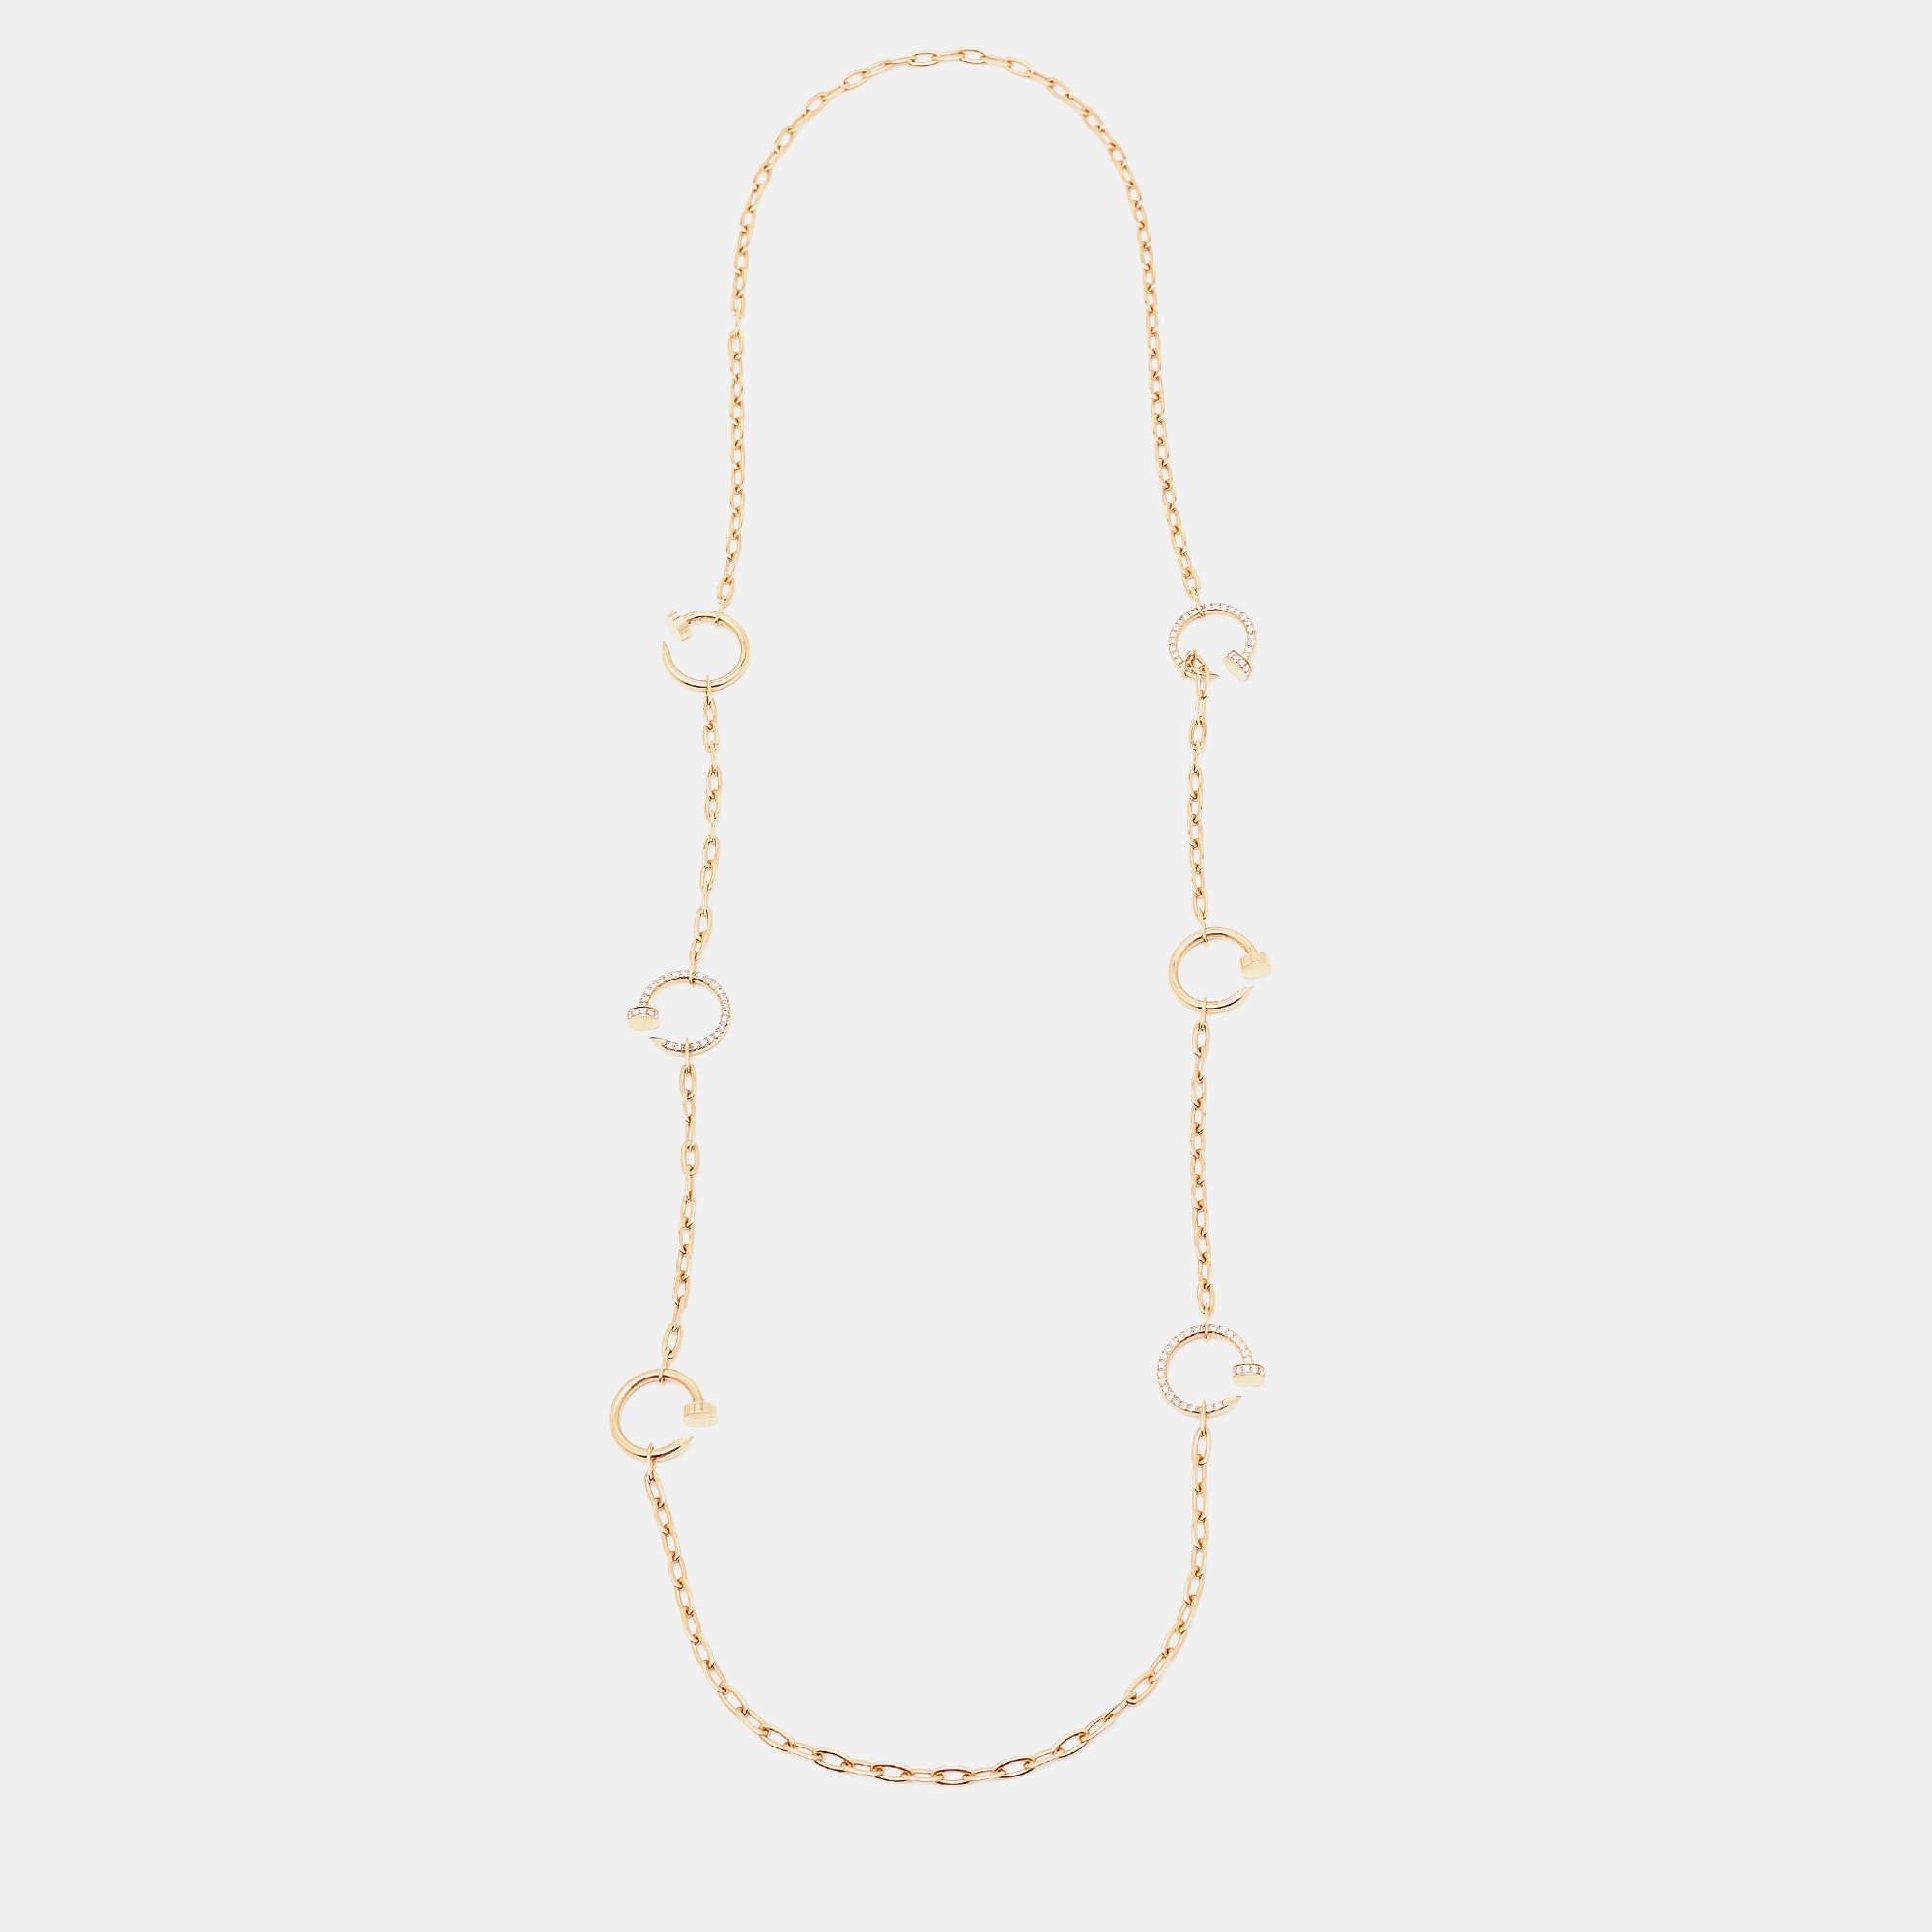 Cartier's Juste Un Clou collection breathes every bit of elegance and grace into its wearer. An ornate piece coming from this signature line, this Juste Un Clou necklace is sculpted from 18k Rose Gold and encrusted with a diamond-studded pendant.

